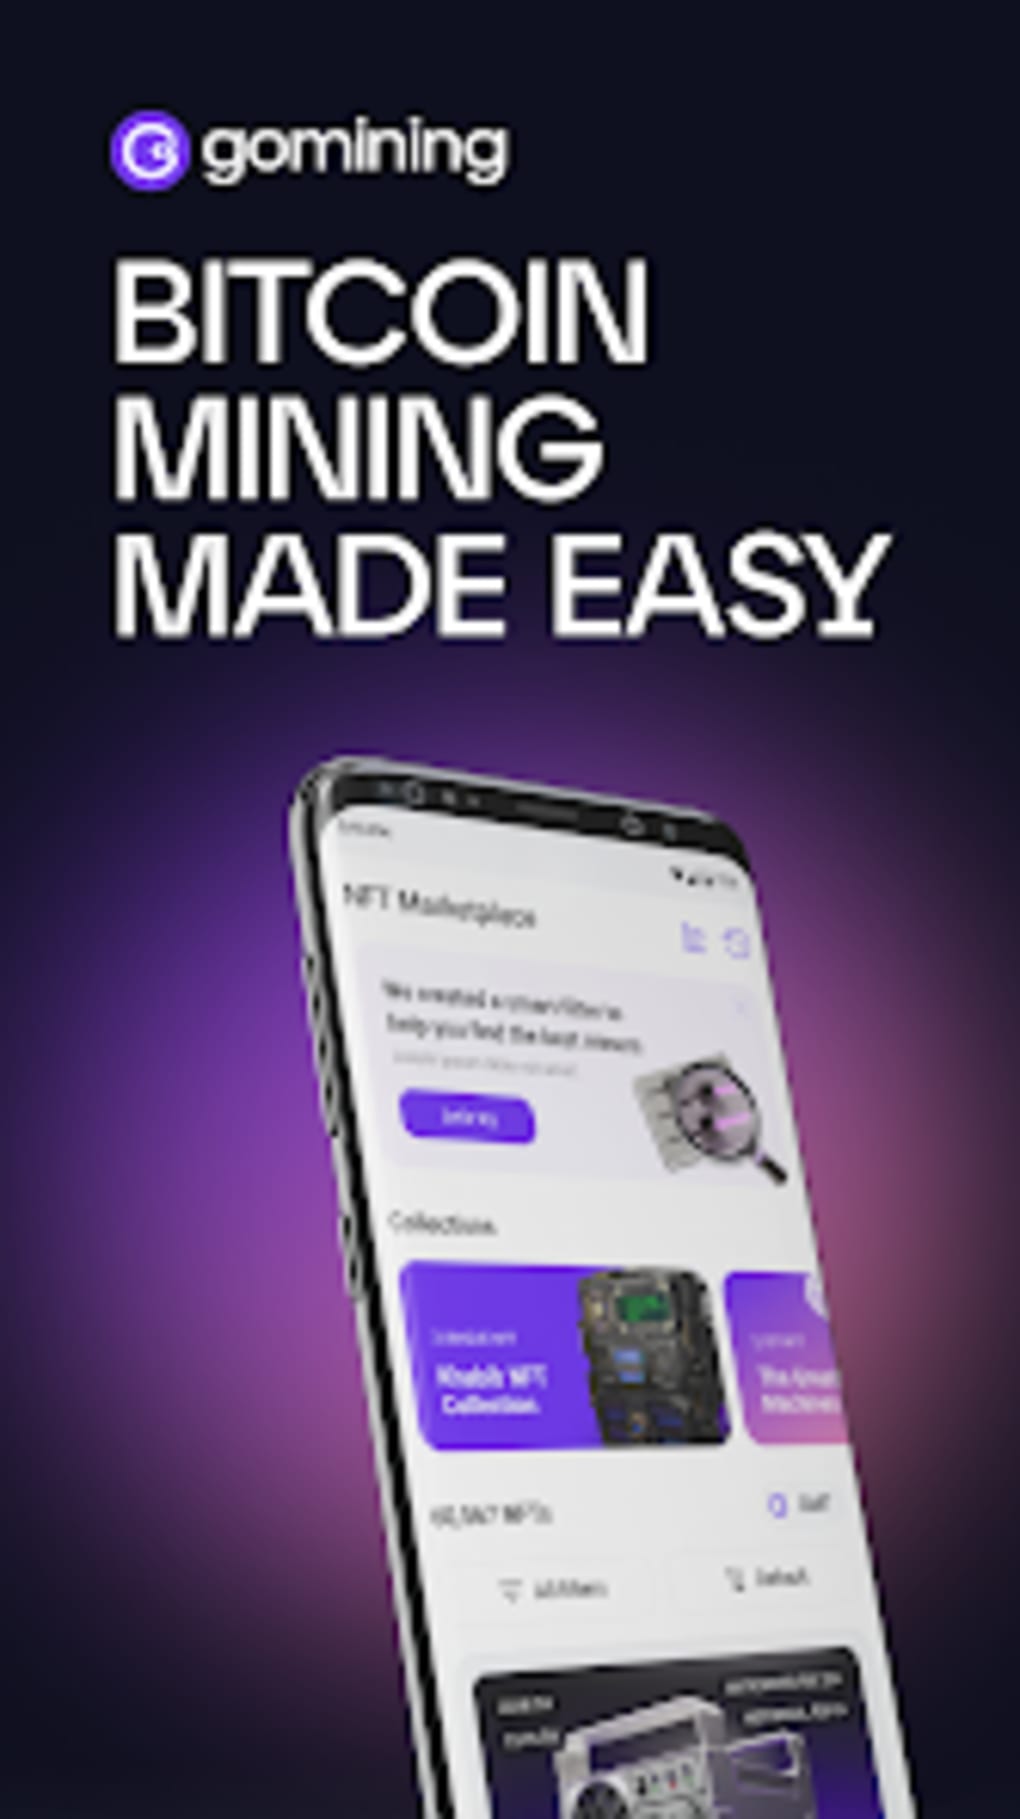 Go mining token price best crypto currency charts